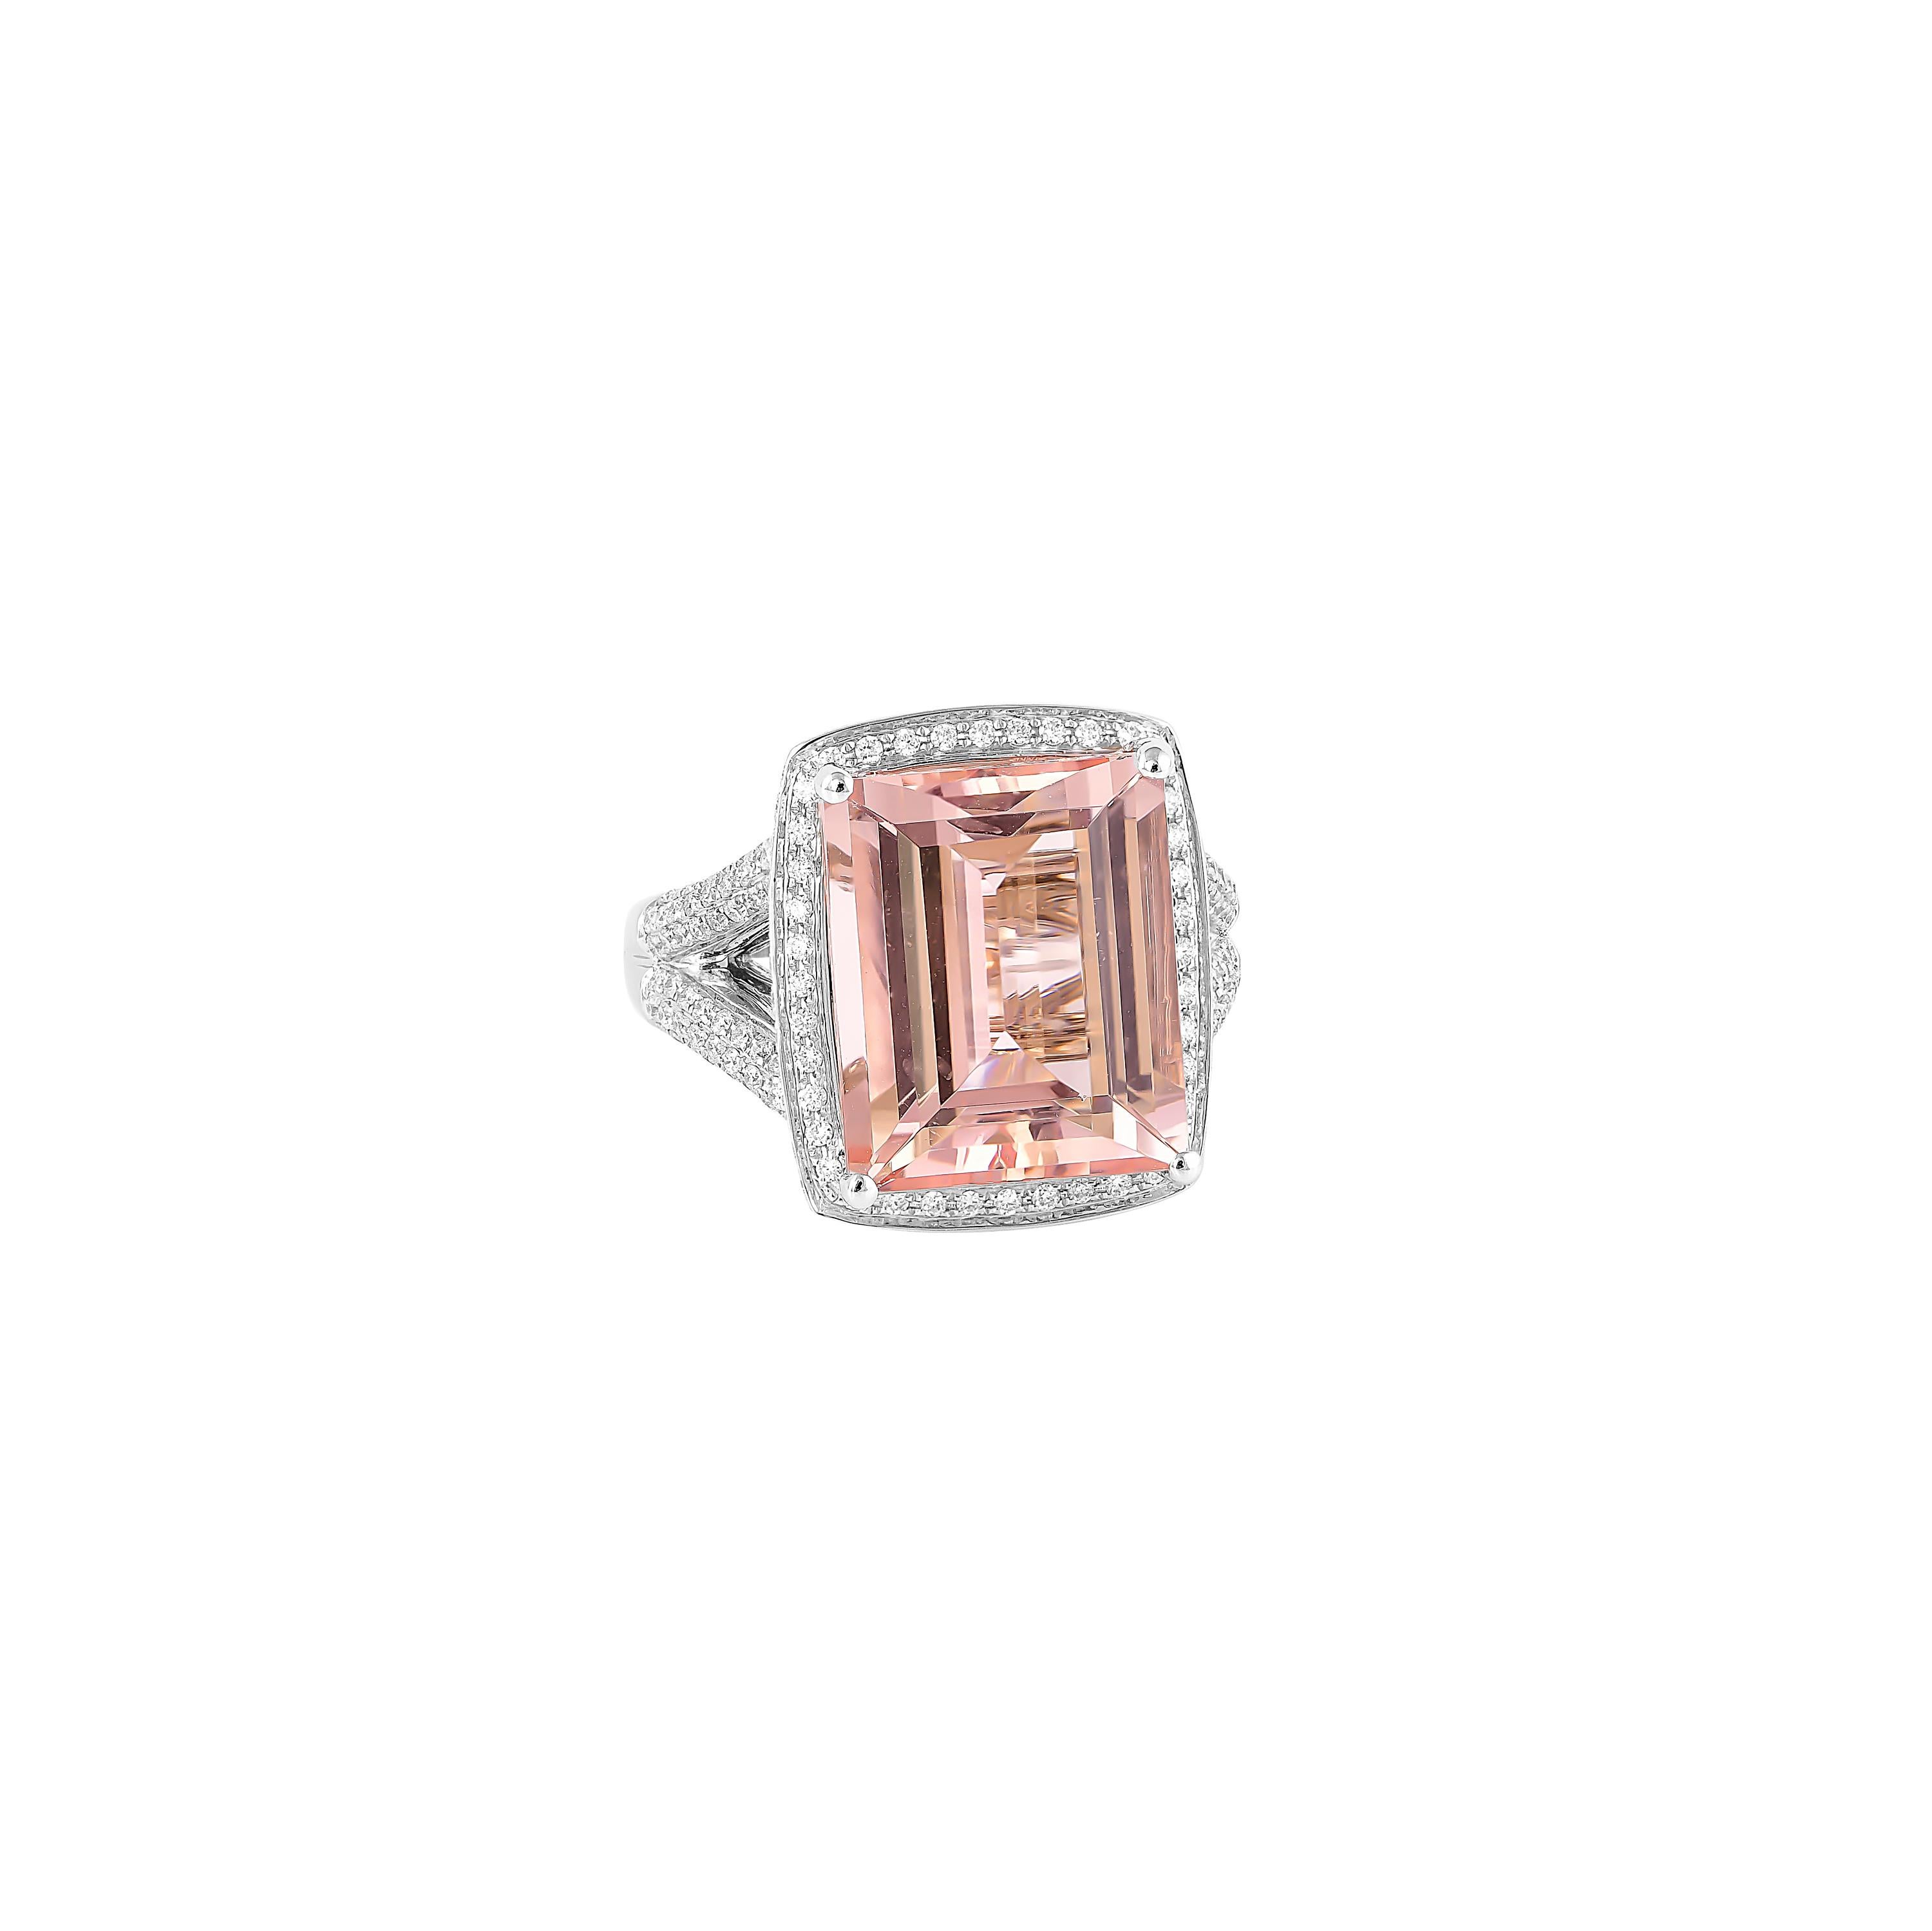 This collection features an array of magnificent morganites! Accented with diamonds these rings are made in white gold and present a classic yet elegant look. 

Classic pink morganite and white diamond ring in 18K white gold. 

Morganite: 10.63